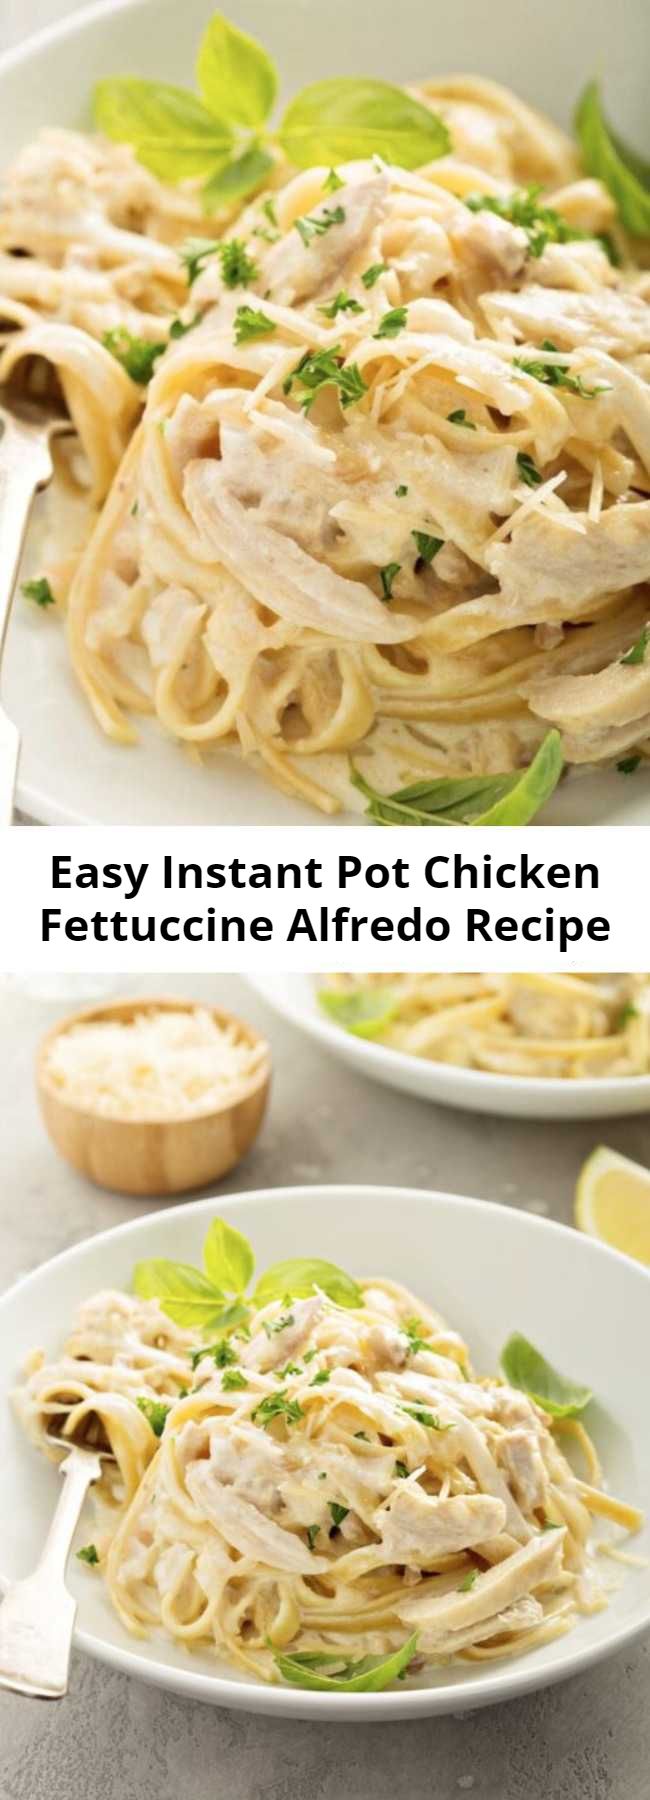 Easy Instant Pot Chicken Fettuccine Alfredo Recipe - When made in the instant pot, this Instant Pot Chicken Fettuccine Alfredo becomes a one pot pasta recipe that couldn't be any easier or more delicious! #InstantPot #OnePot #Pasta